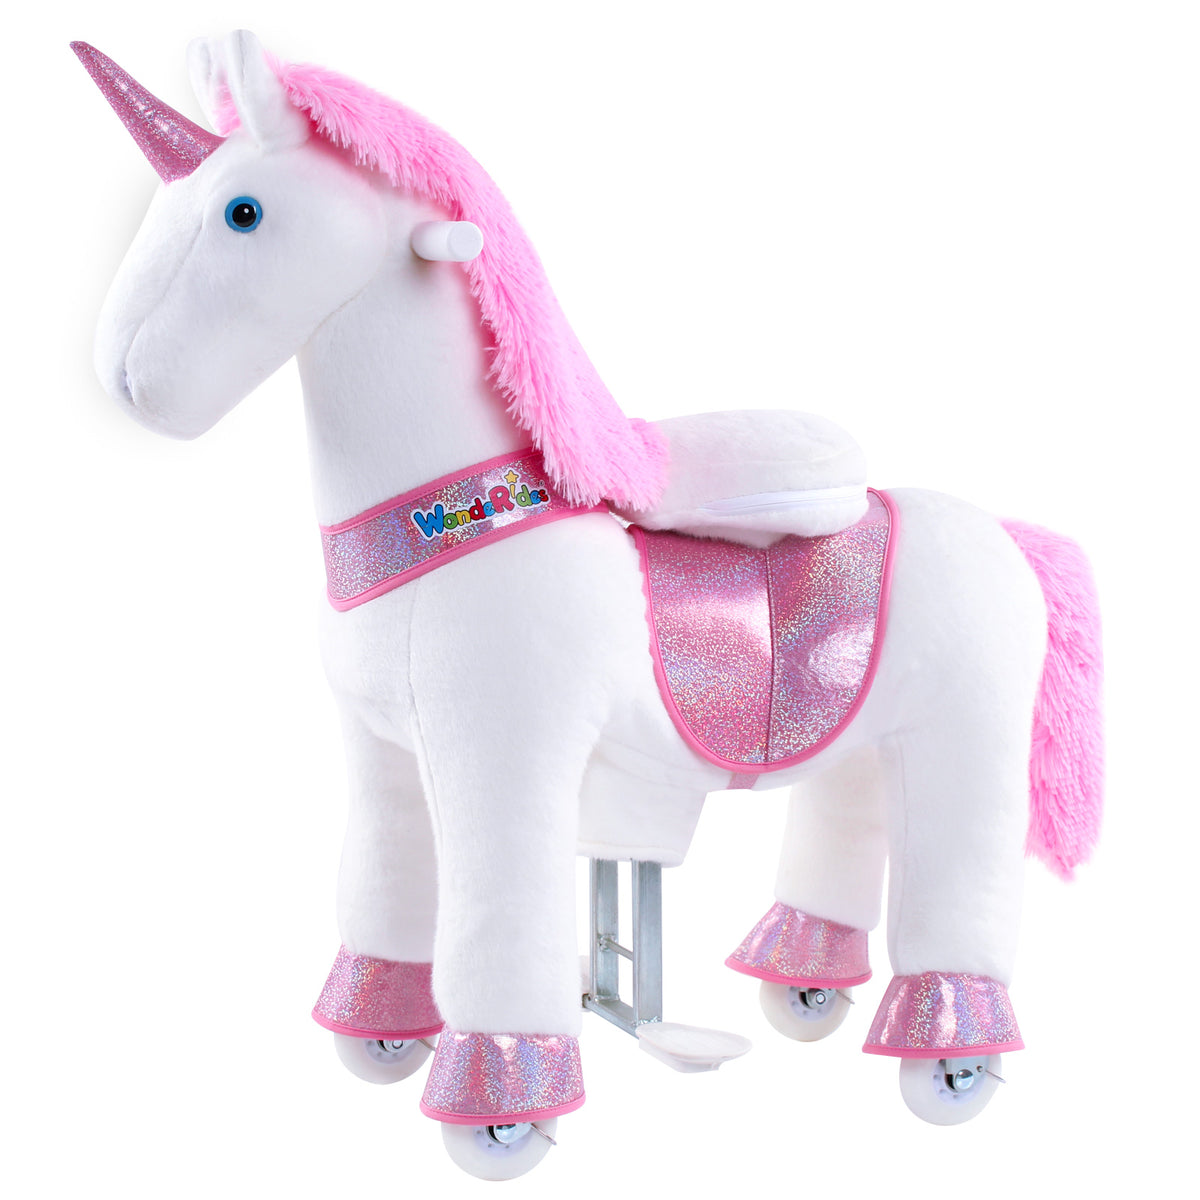 WondeRides Ride-on Toy Size 3 for Age 3-5 Pink Unicorn